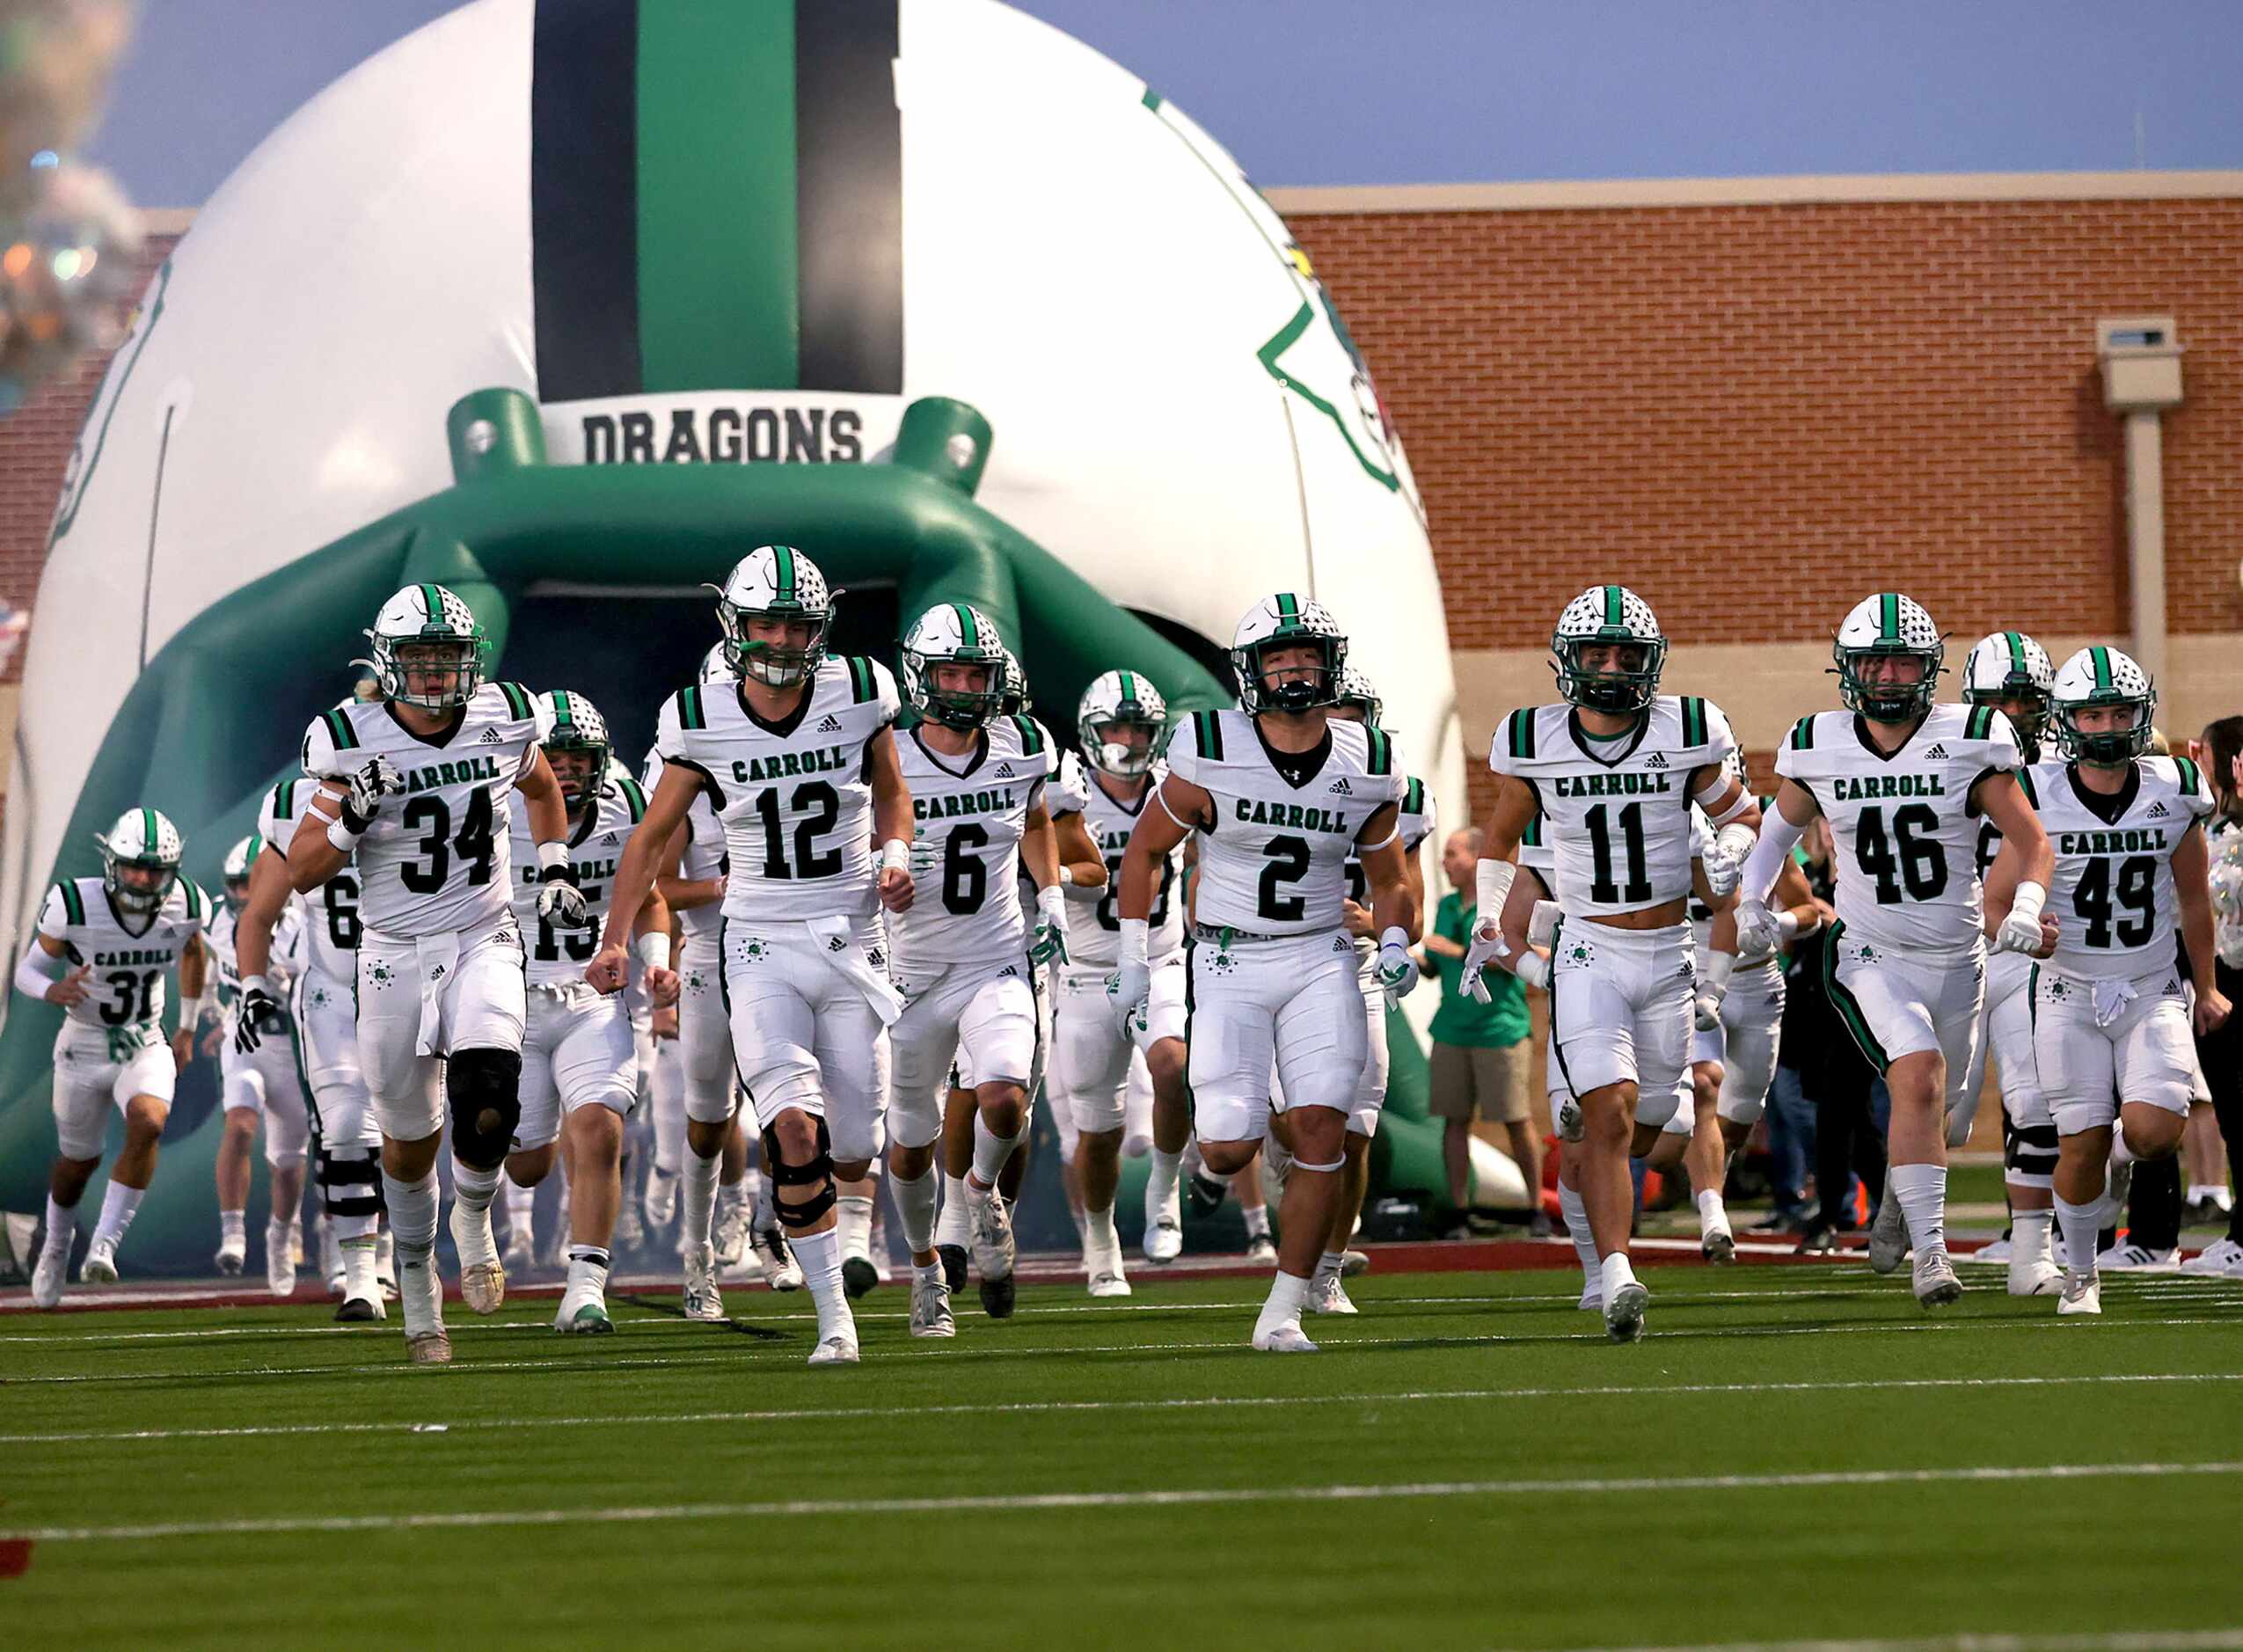 The Southlake Carroll Dragons enter the field to face Eaton in a District 4-6A high school...